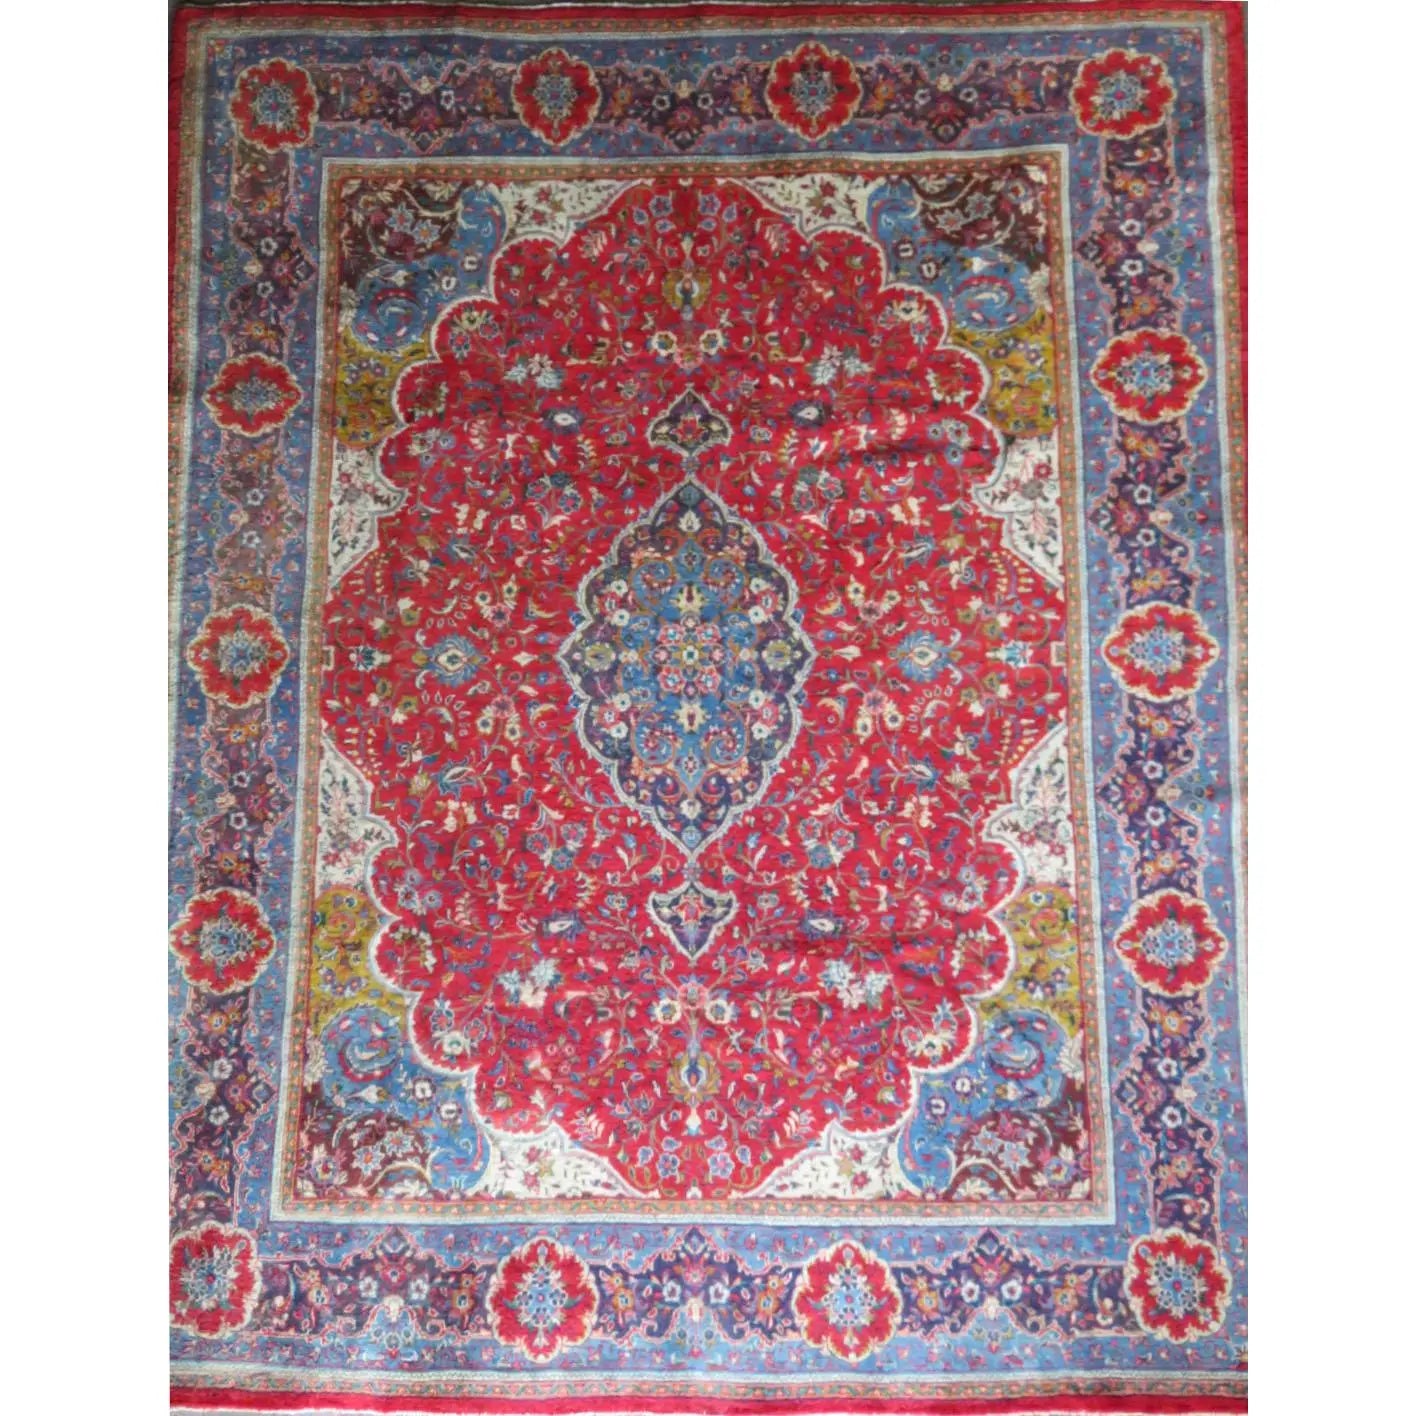 Hand-Knotted Persian Wool Rug _ Luxurious Vintage Design, 12'5" X 9'9", Artisan Crafted